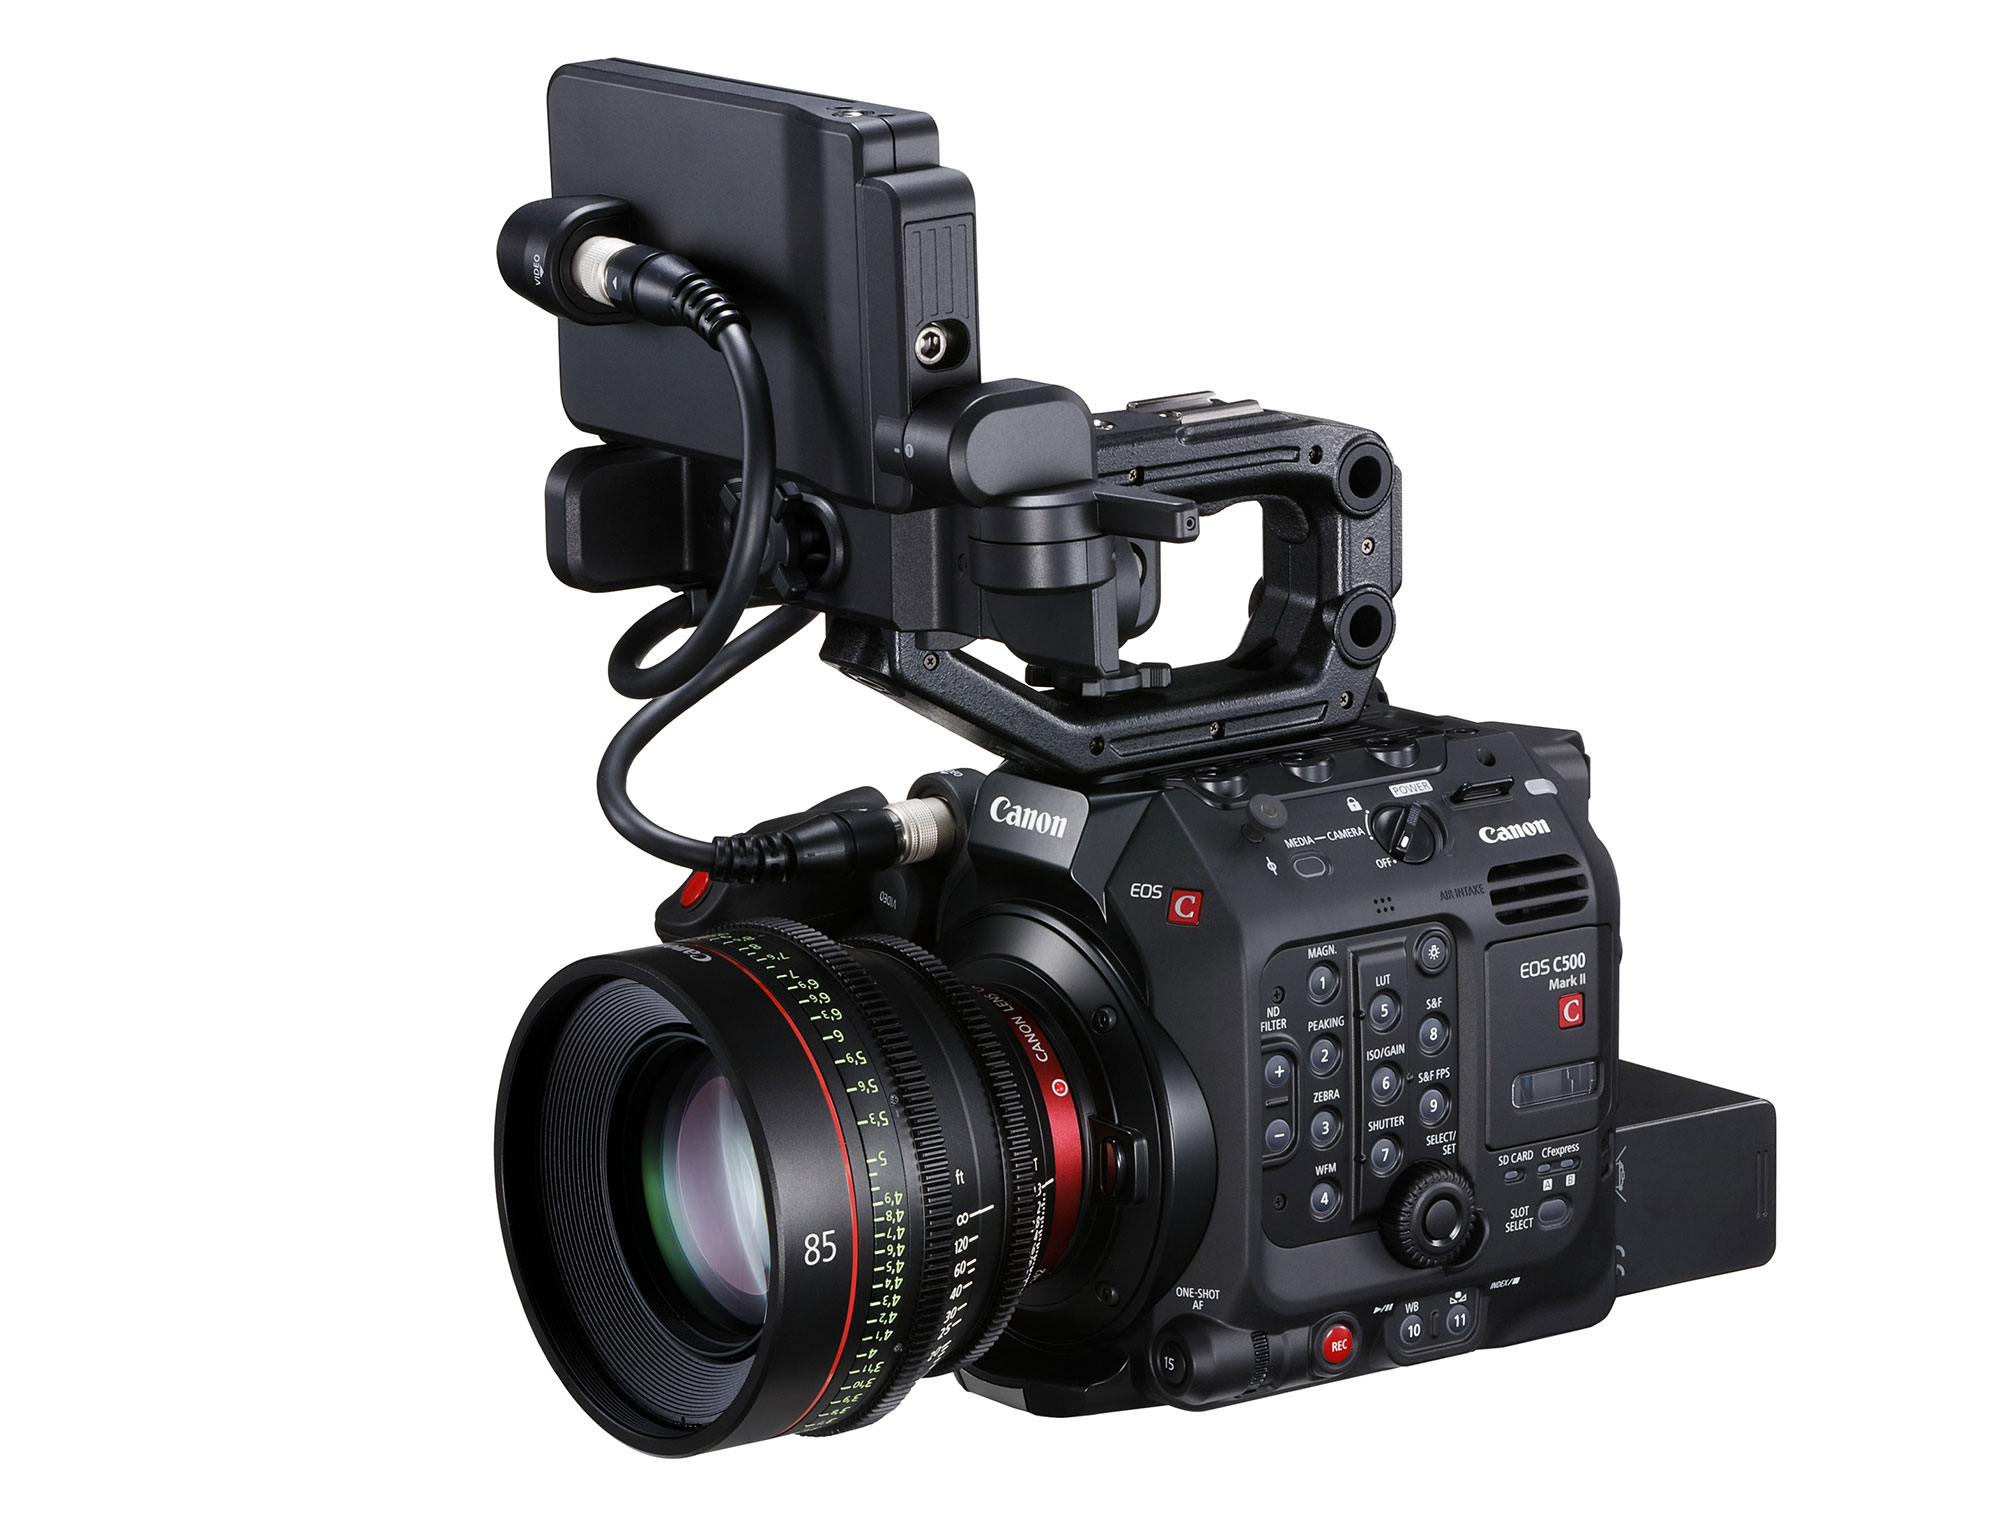 Canon: New firmware for EOS C500 Mark II and EOS C300 Mark III brings new features